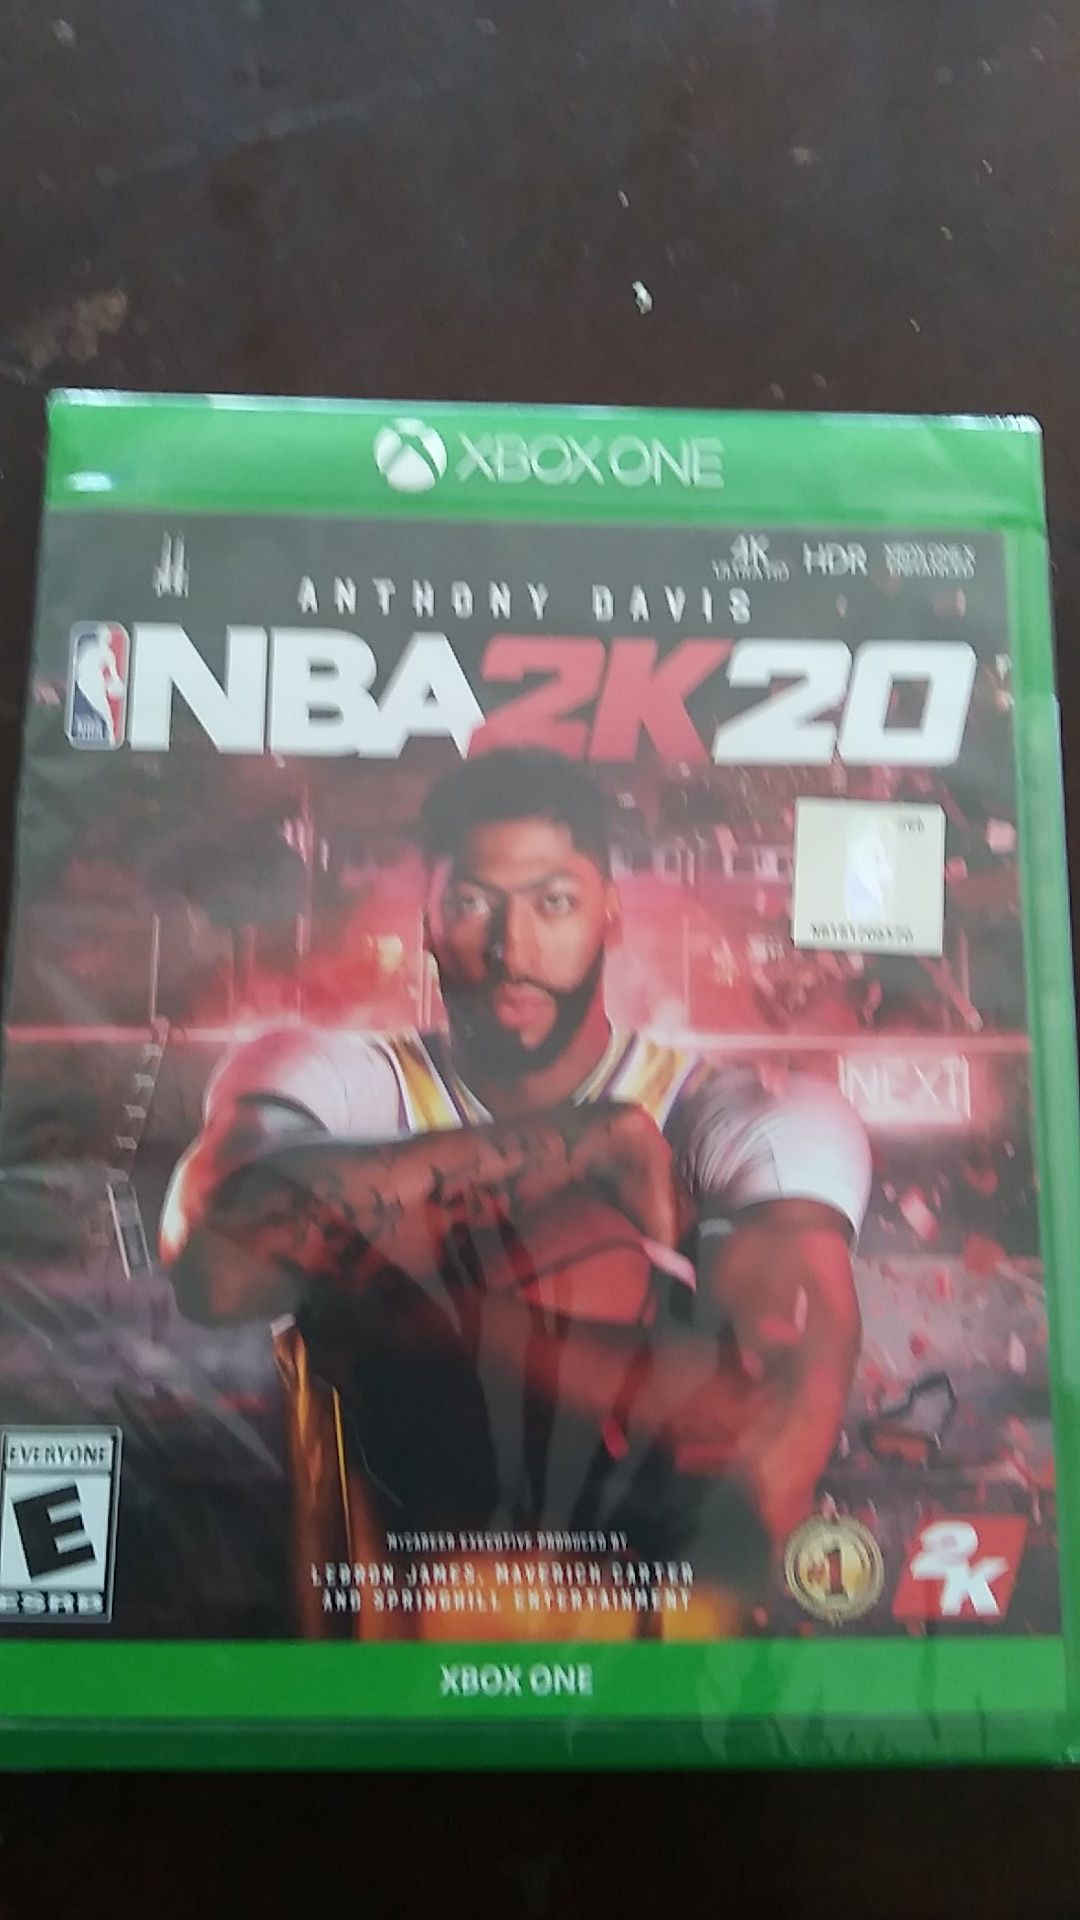 Xbox One game